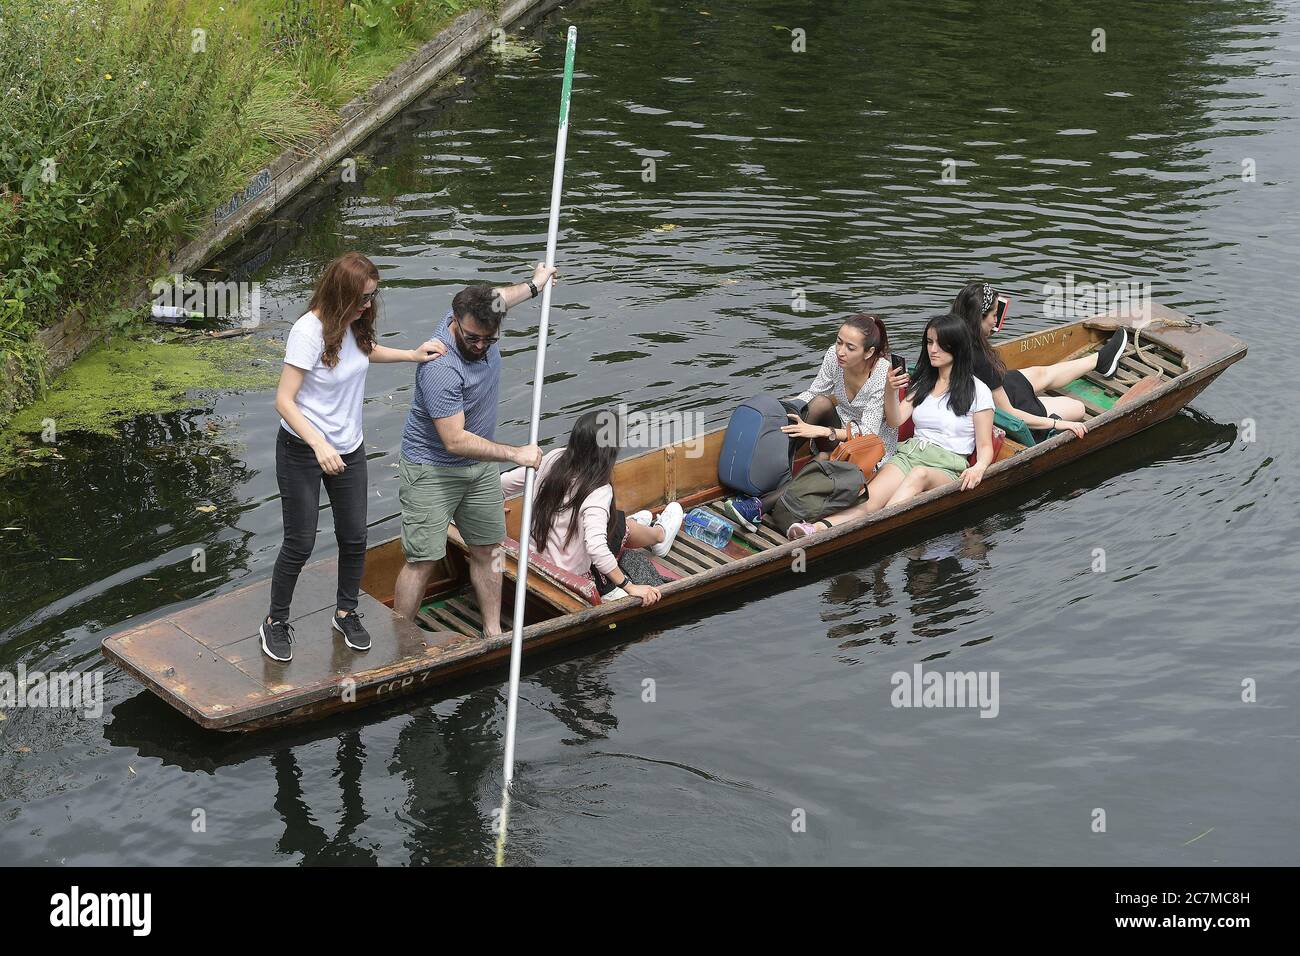 Cambridge, UK. 18th July, 2020. Visitors to Cambridge enjoy the warm spell of weather by taking rides on Punts on the River Cam. Credit: MARTIN DALTON/Alamy Live News Stock Photo